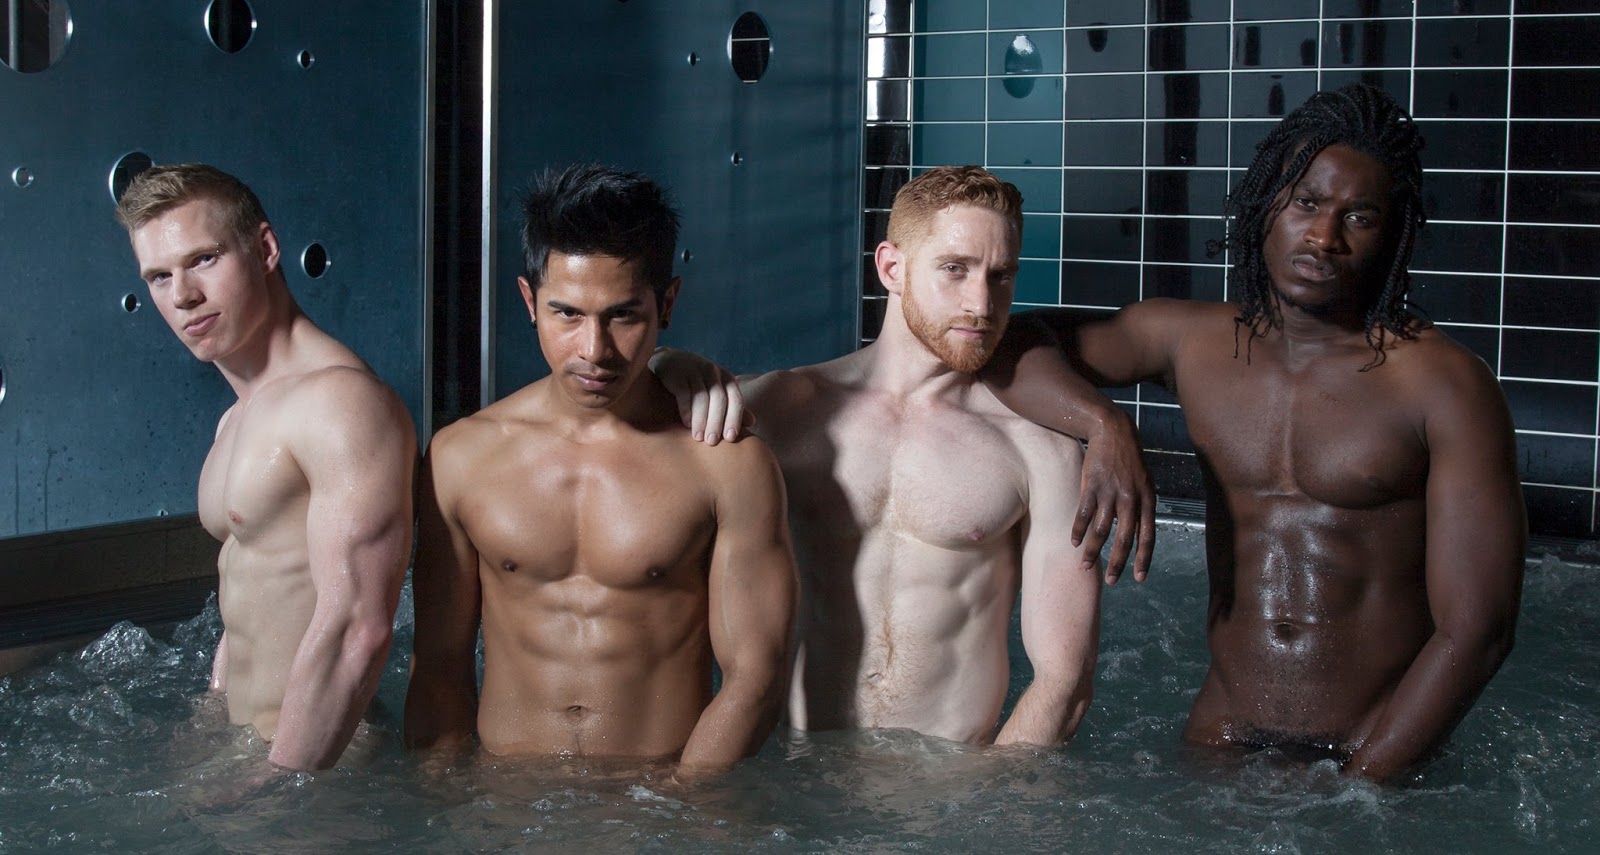 Nyc bath houses are back, and gay men are cruising them once more